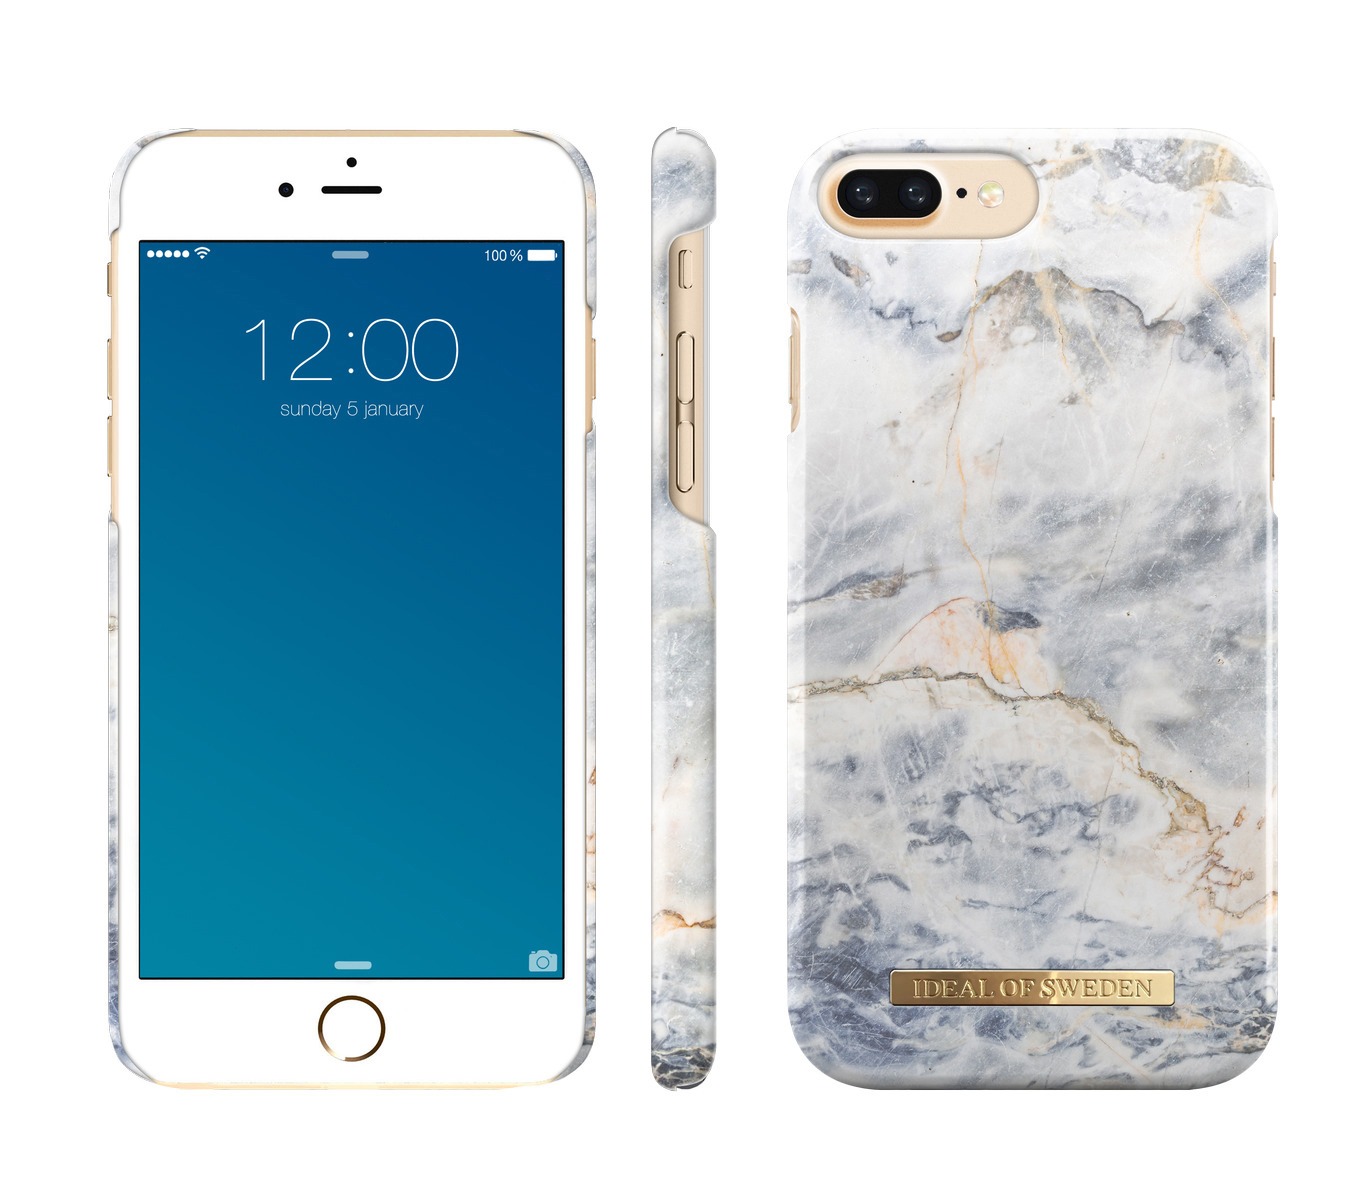 Plus, Plus, Fashion, Backcover, 8 ,iPhone Plus iPhone OF Ocean 7 SWEDEN iPhone 6 Marble Apple, IDEAL